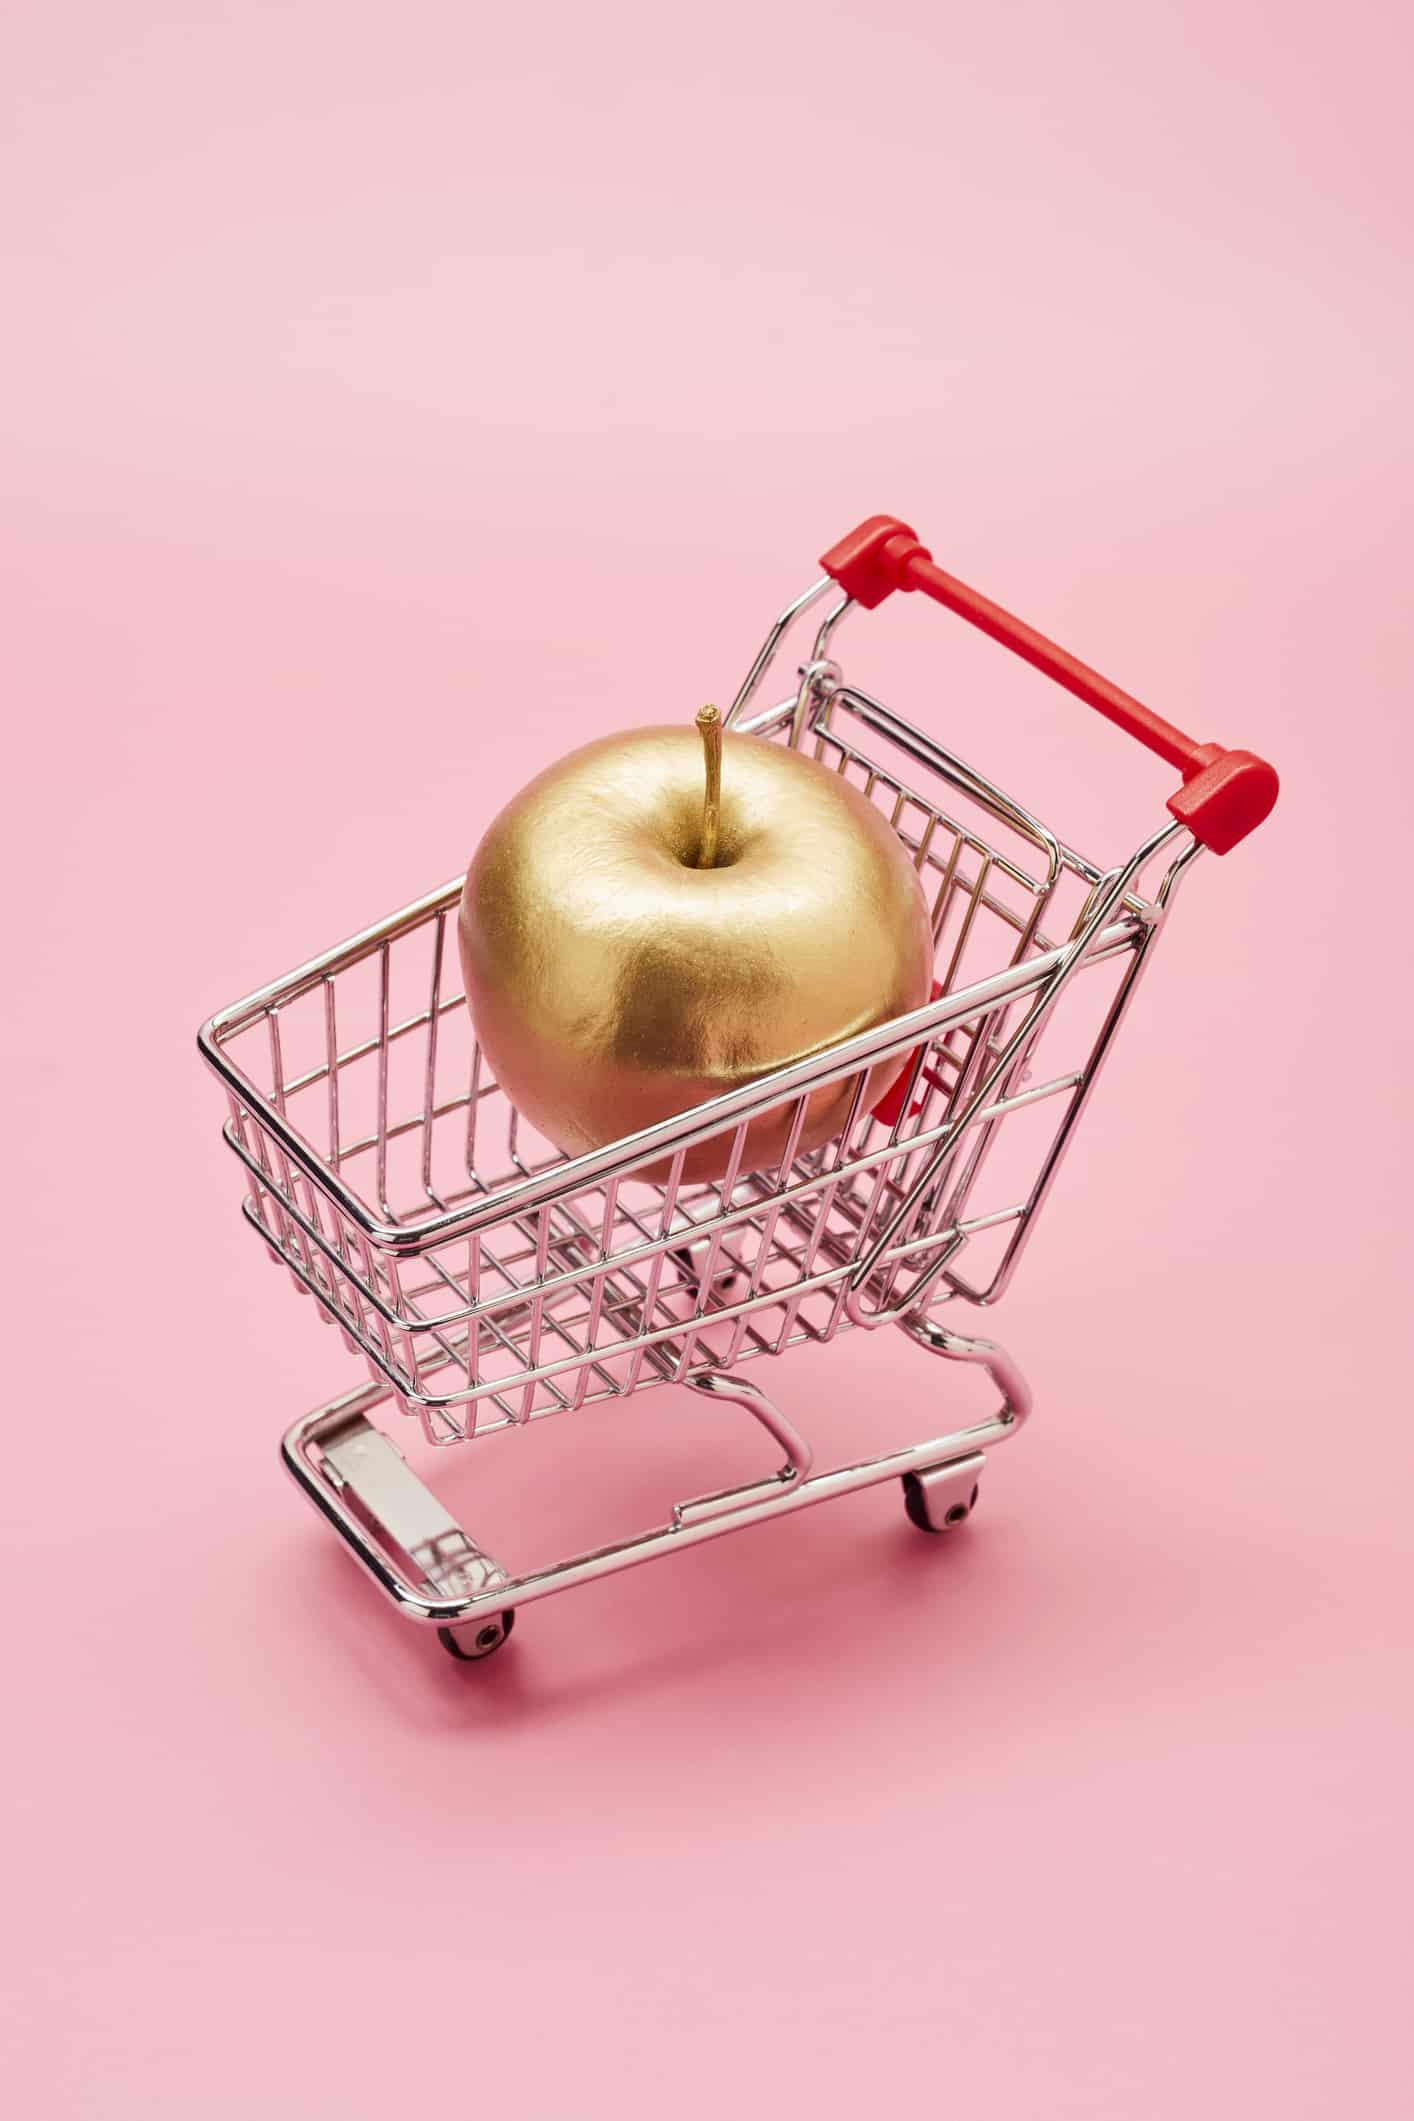 Still life of a small shopping cart and a golden apple on pink background